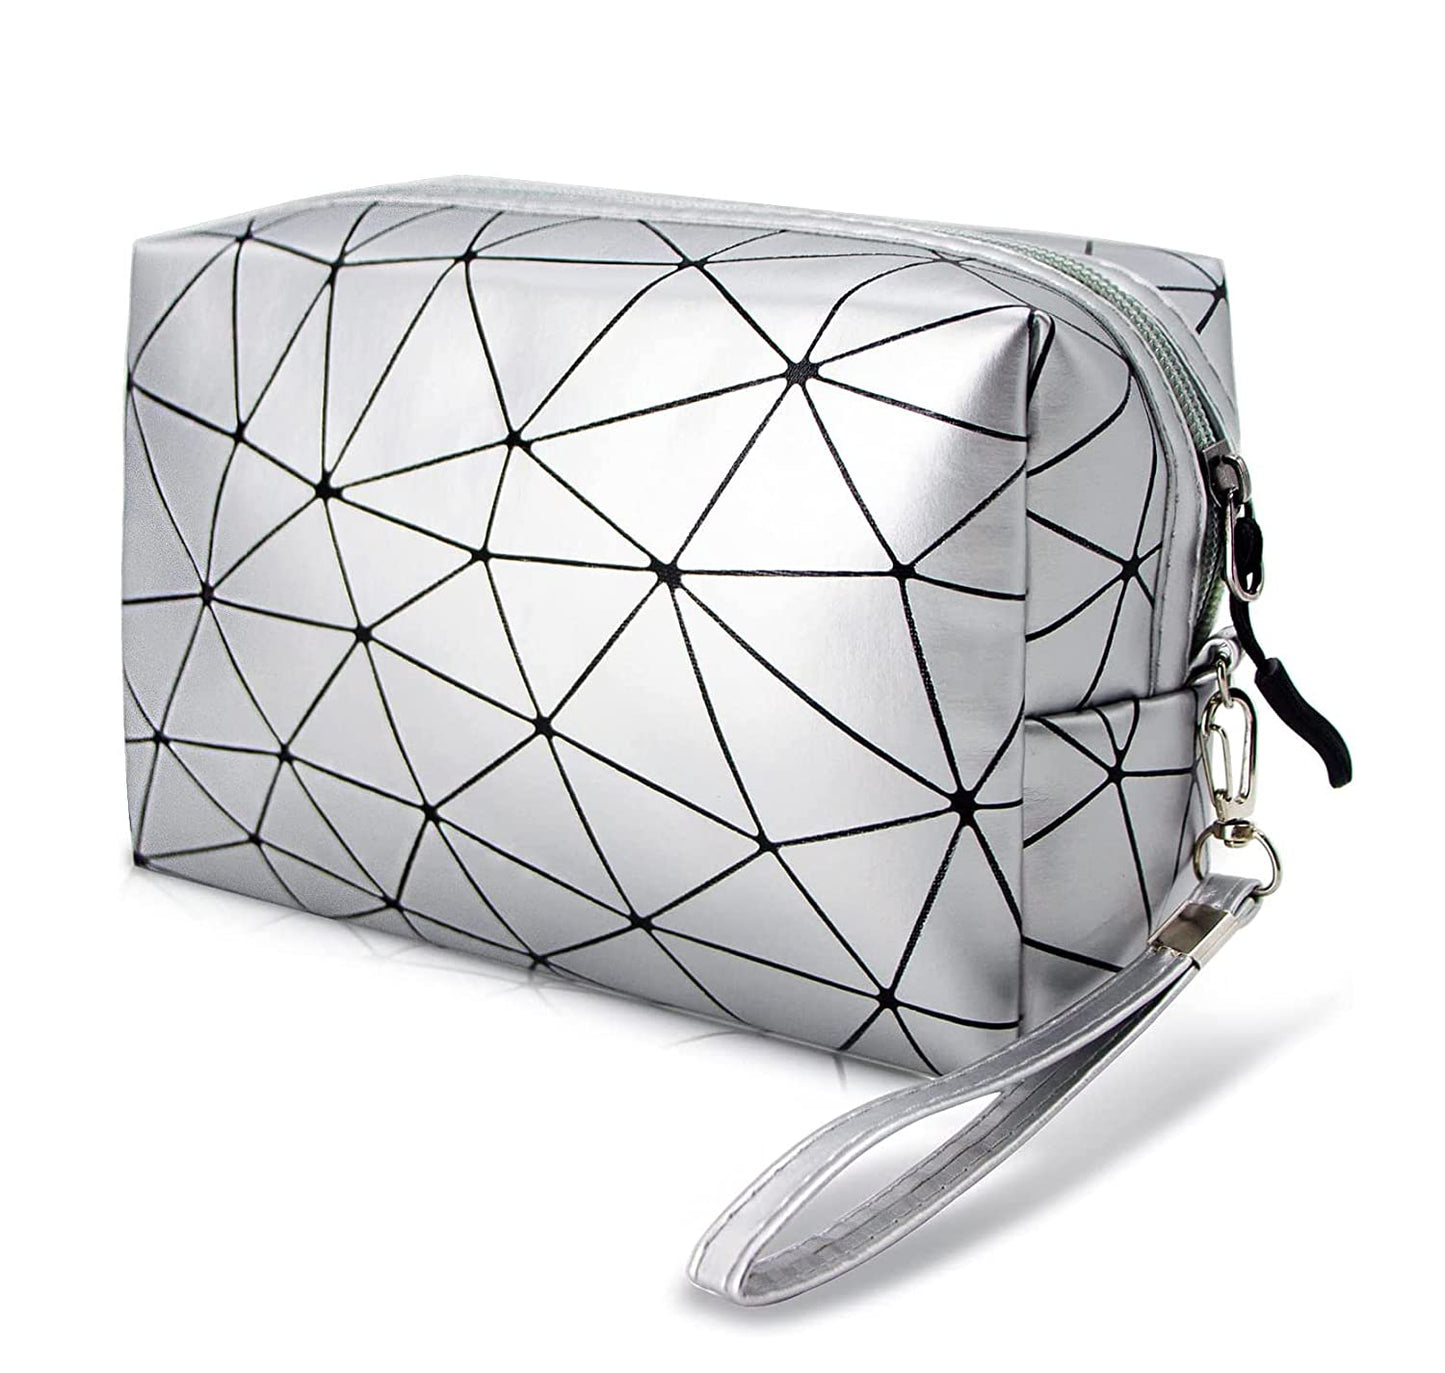 Geometric Toiletry Makeup Bag for Women and Girls